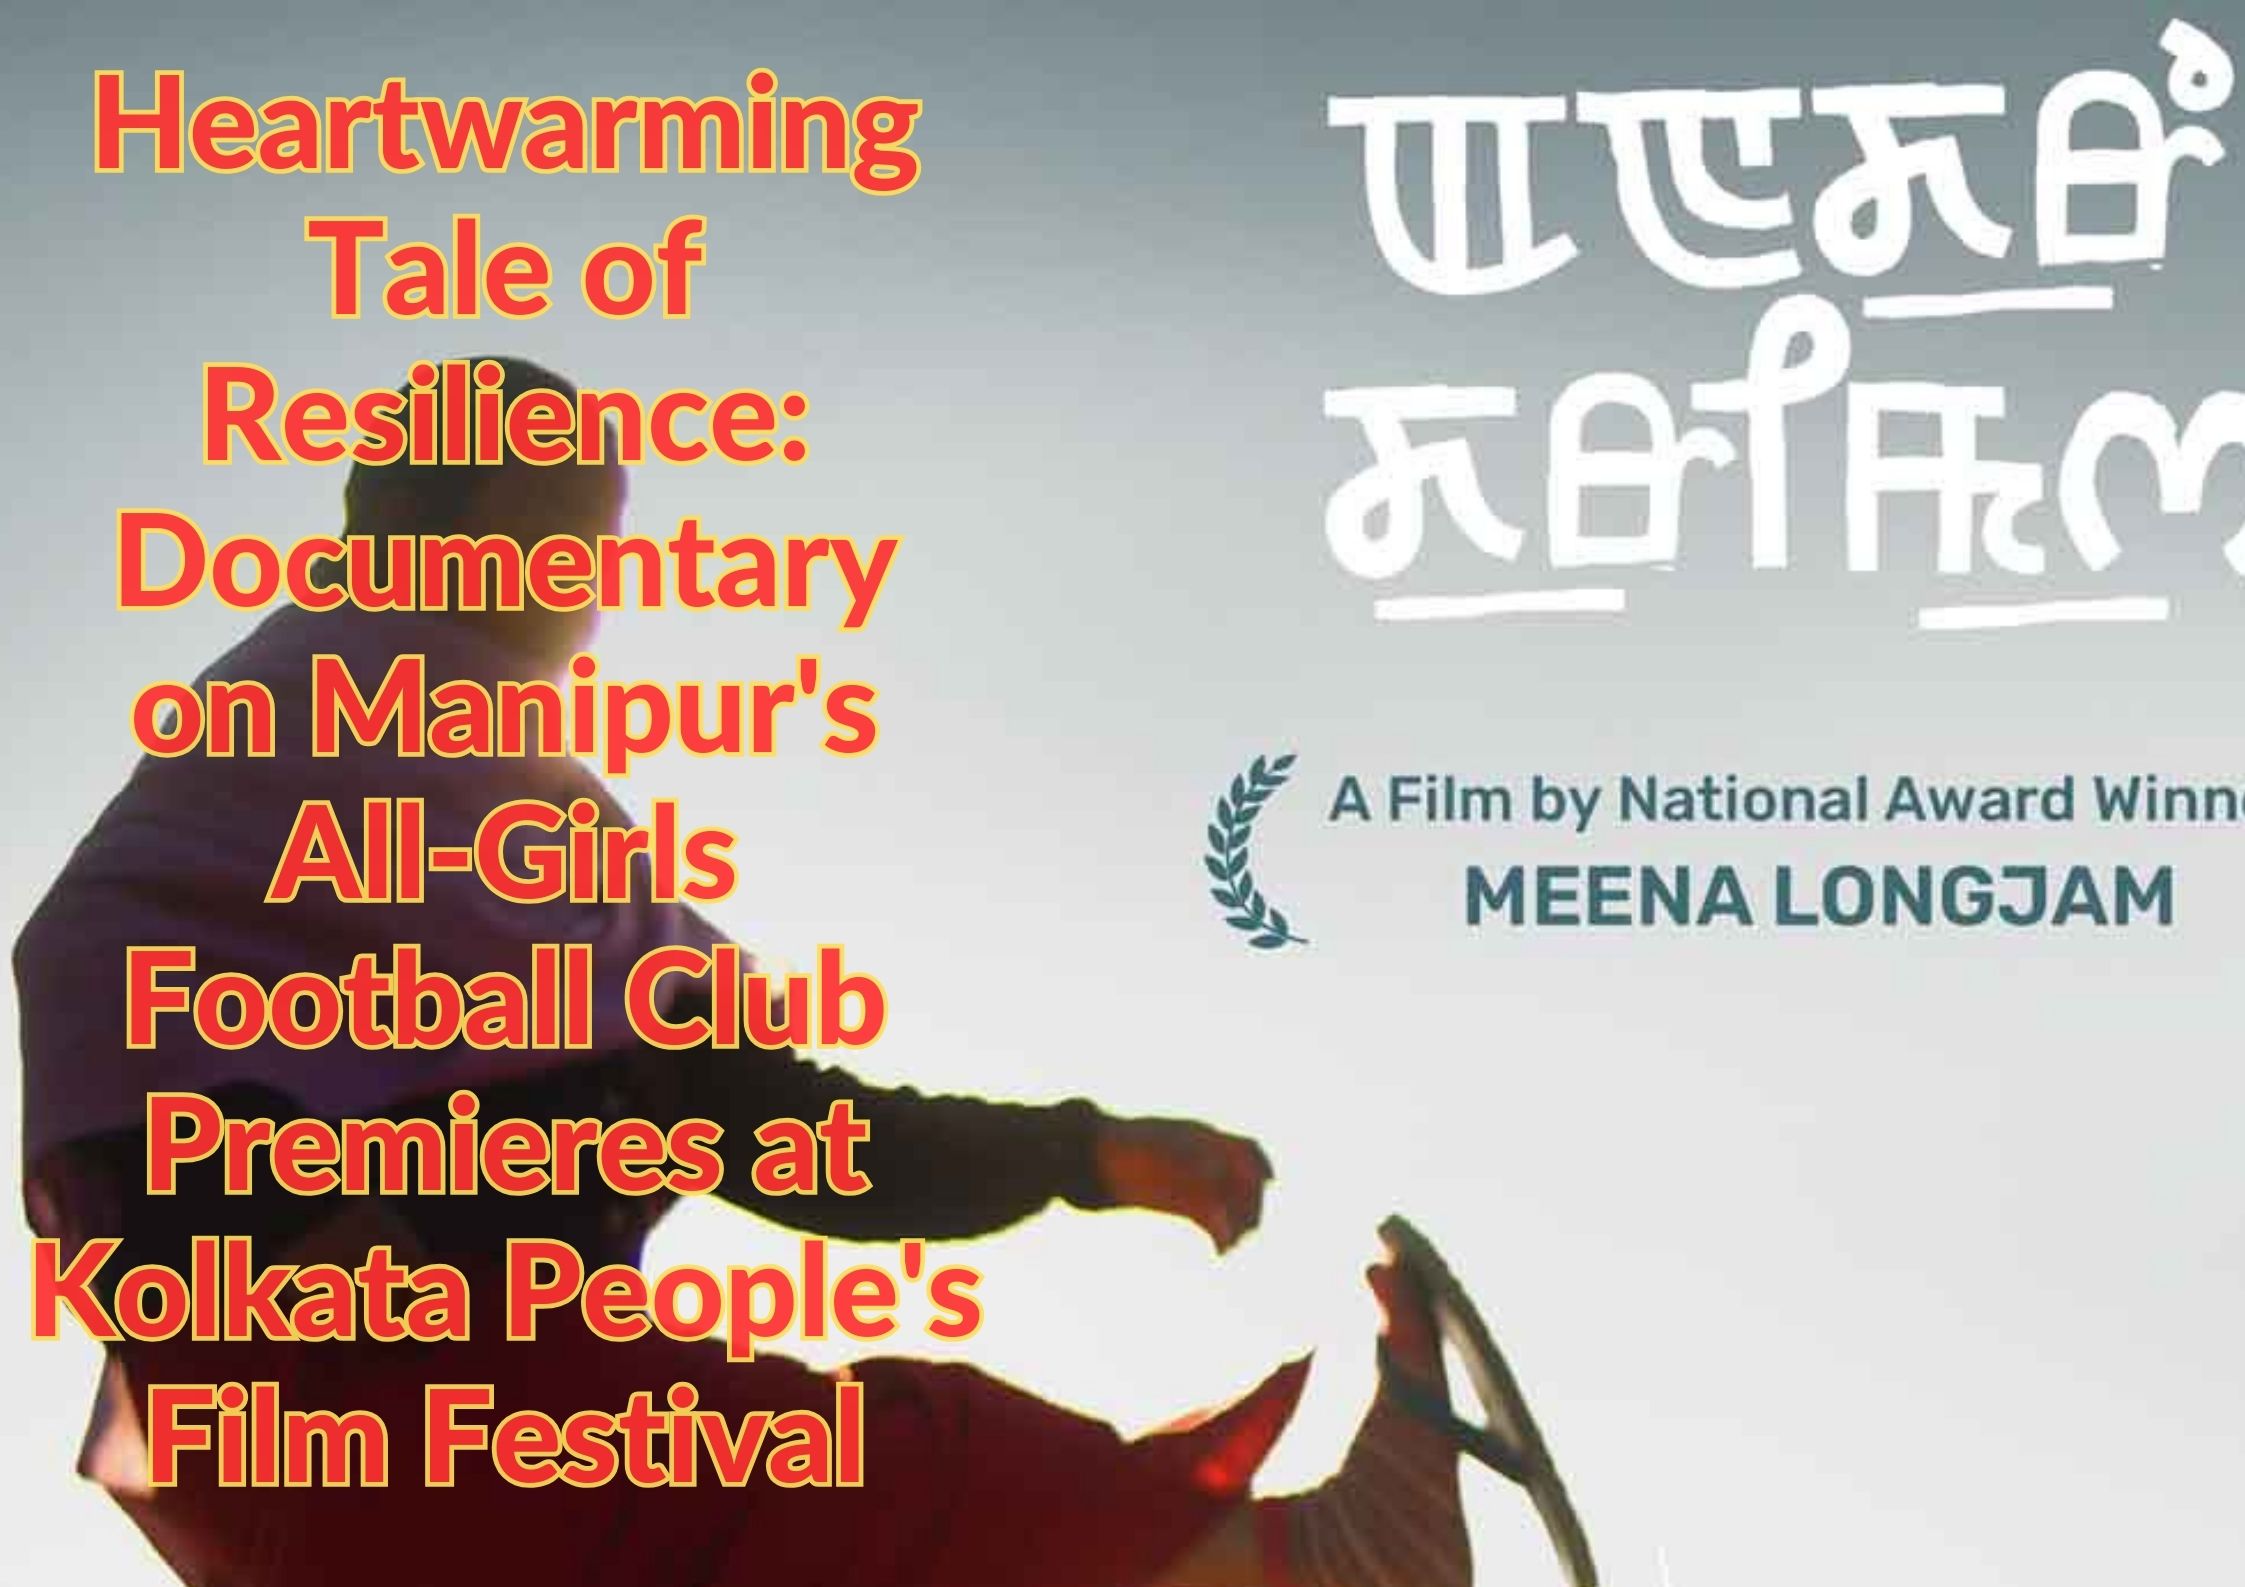 Heartwarming Tale of Resilience: Documentary on Manipur's All-Girls' Football Club Premieres at Kolkata People's Film Festival